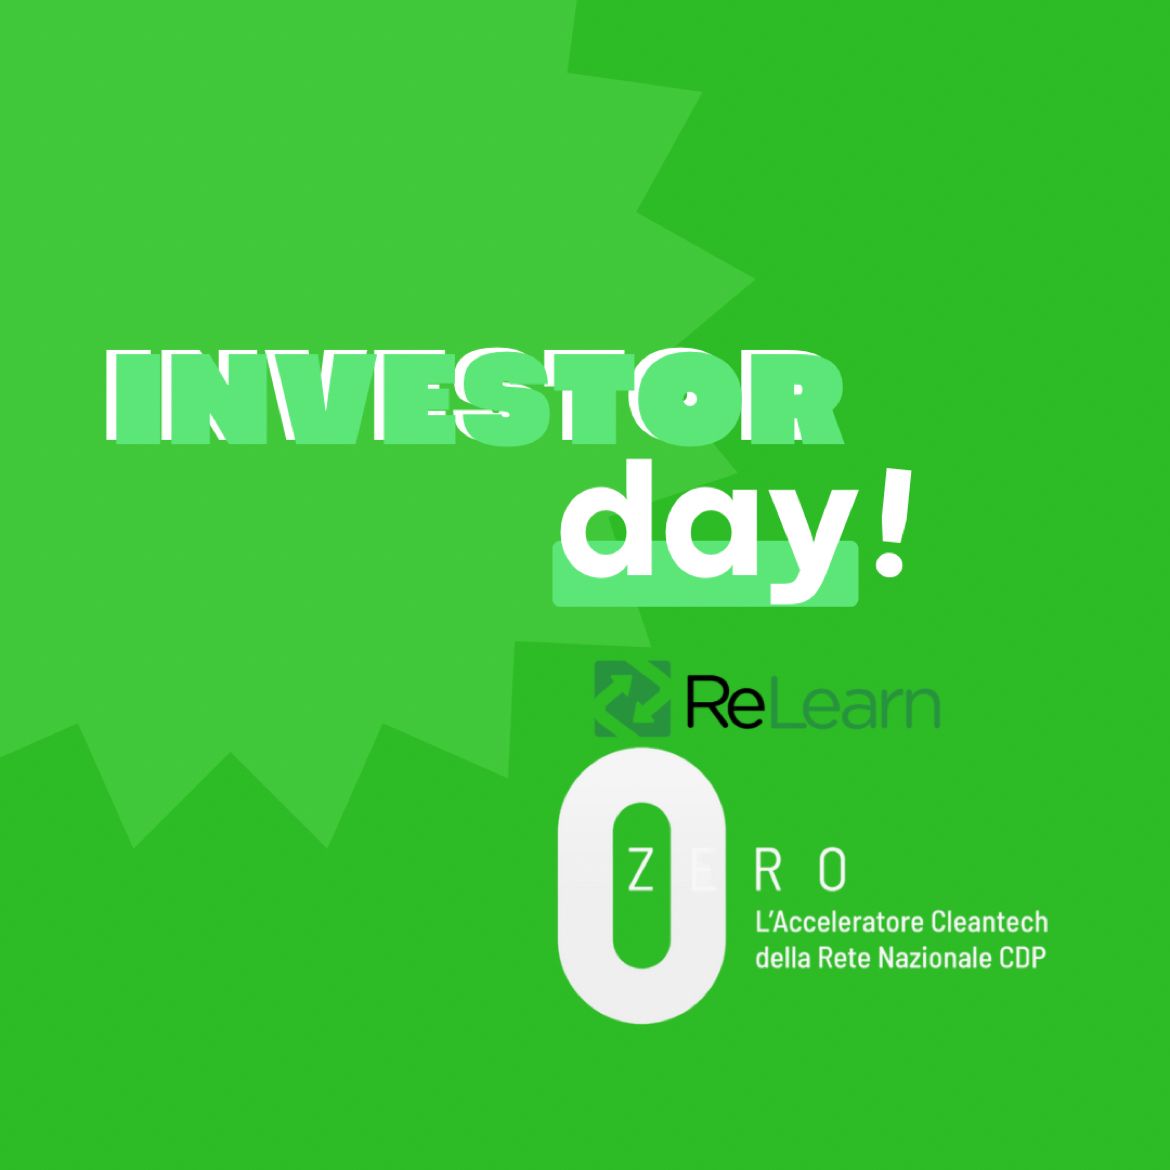 ReLearn takes part in the Zero Investor Day at LVenture Group Headquarters in Rome